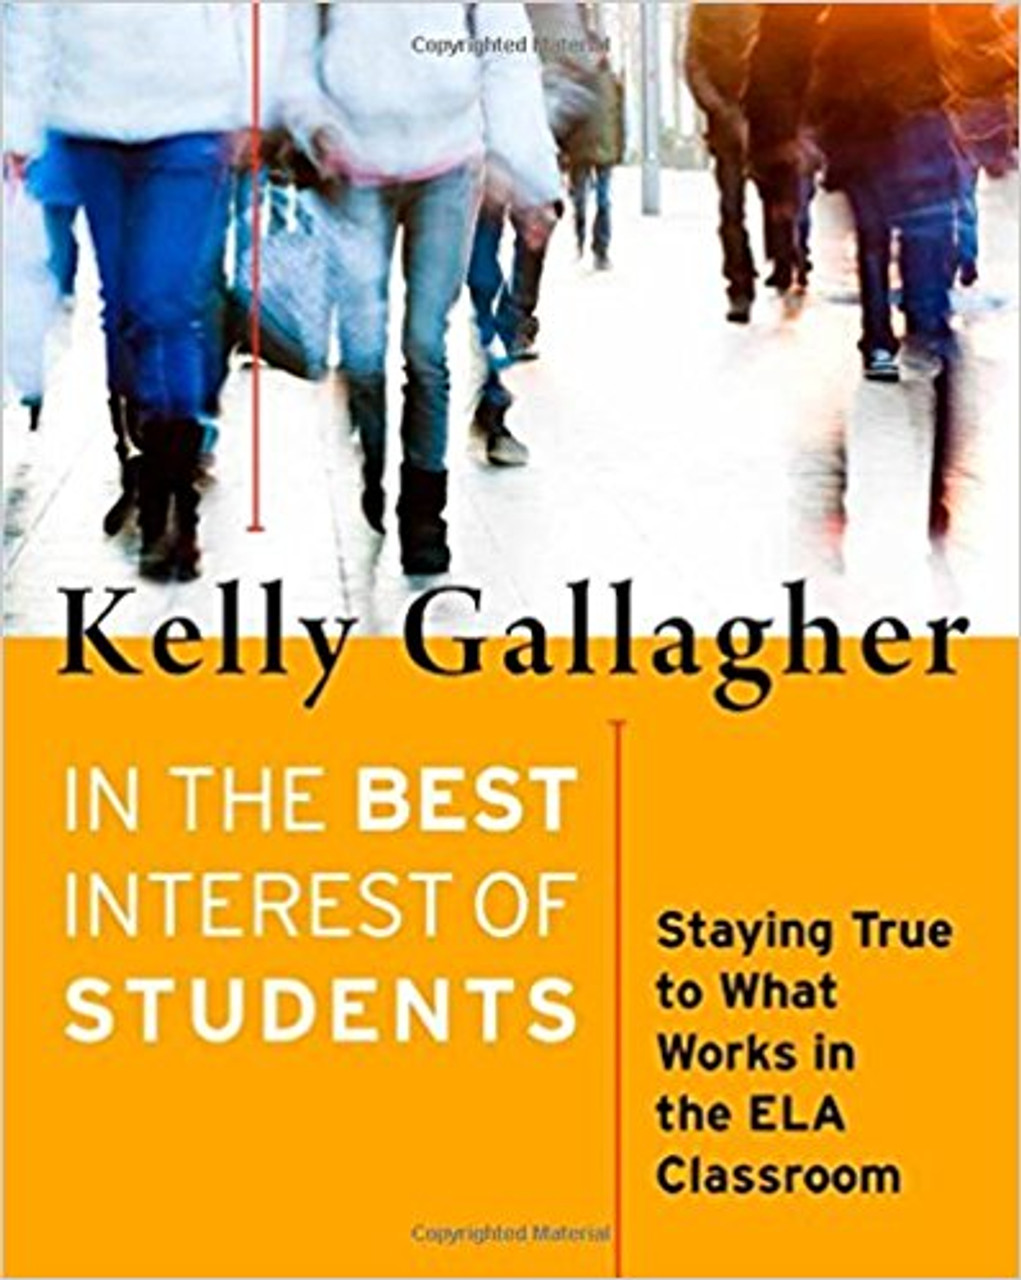 In the Best Interest of the Students: Staying True to What Works in the ELA Classroom by Kelly Gallagher